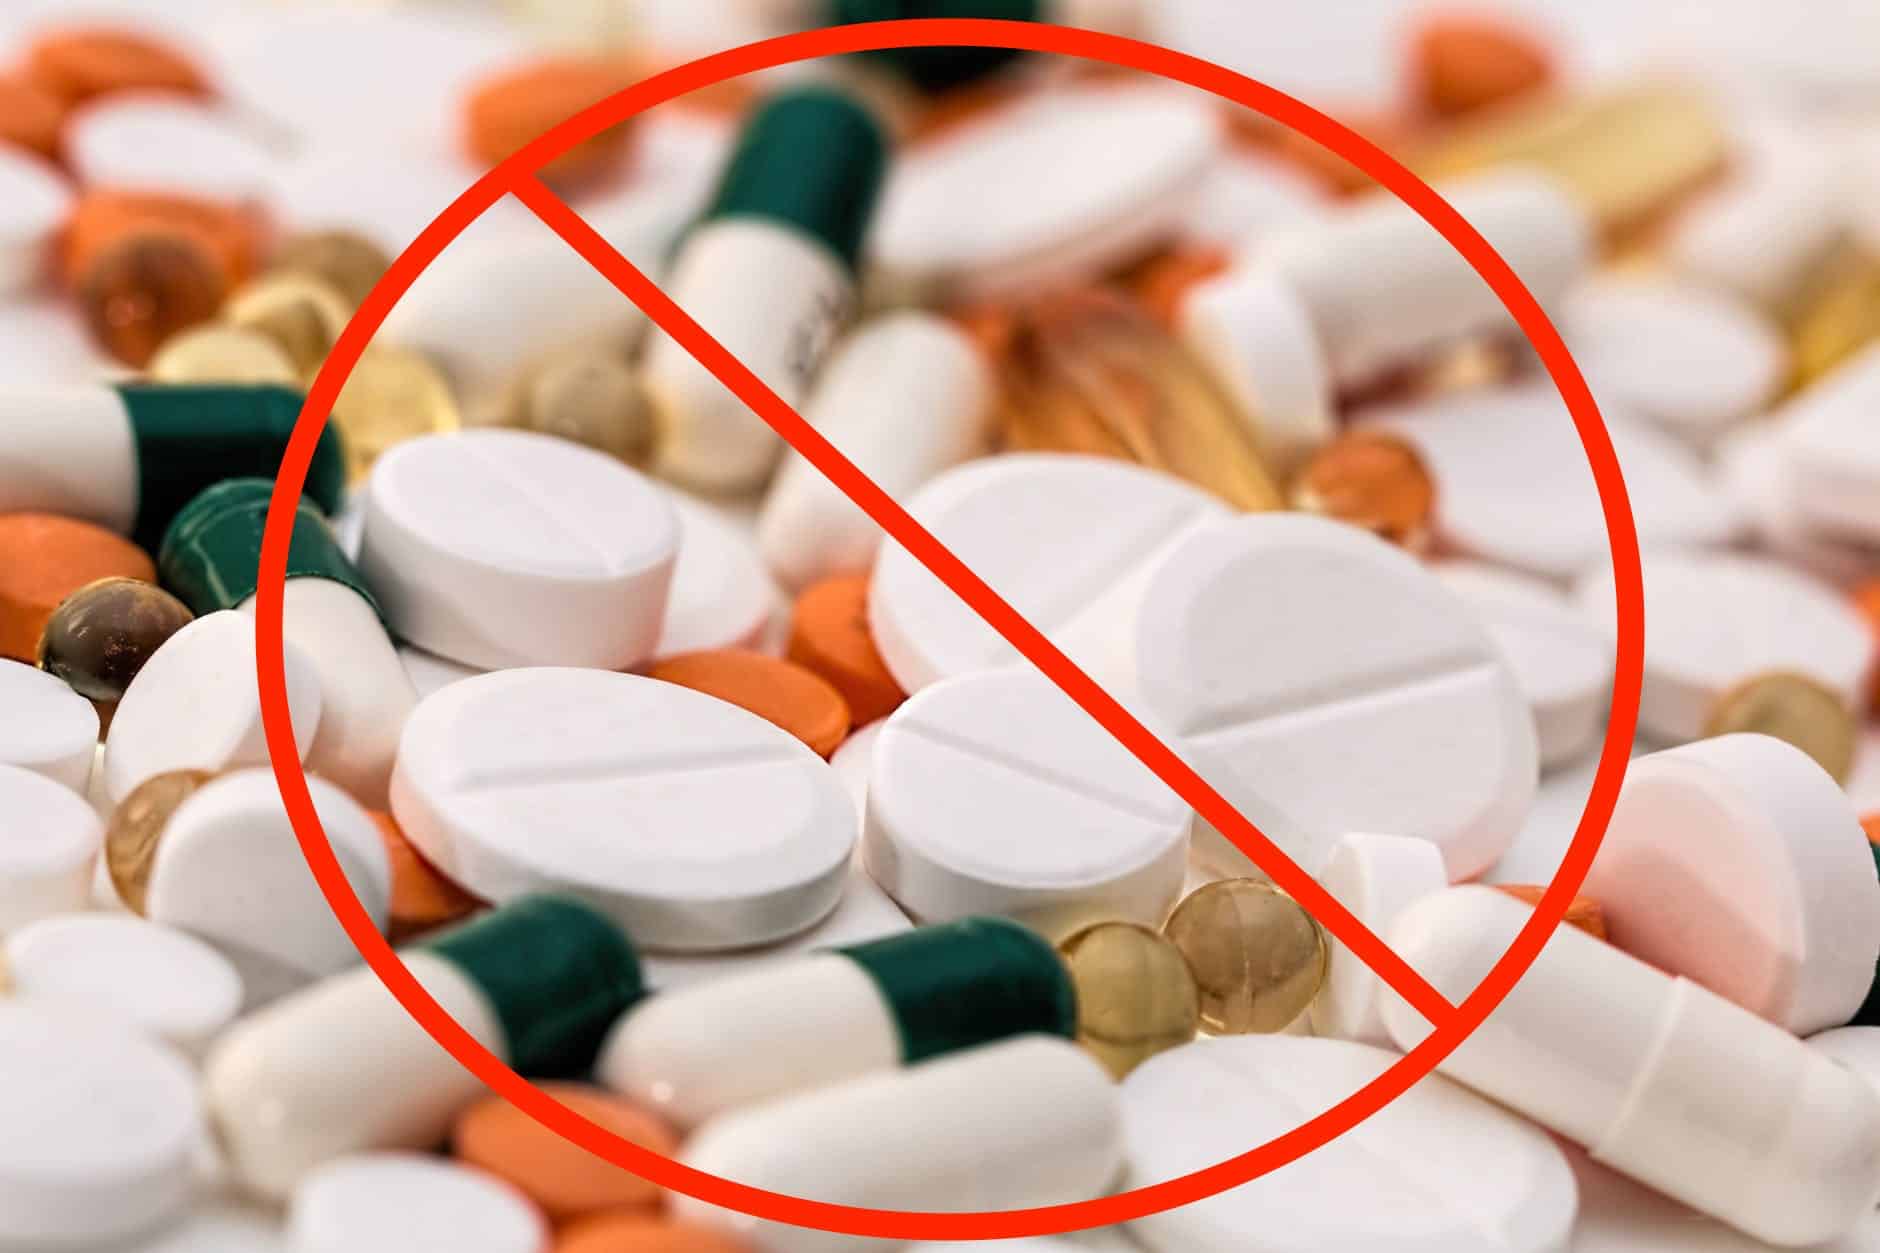 Natural Alternatives to Combat the Opioid Epidemic